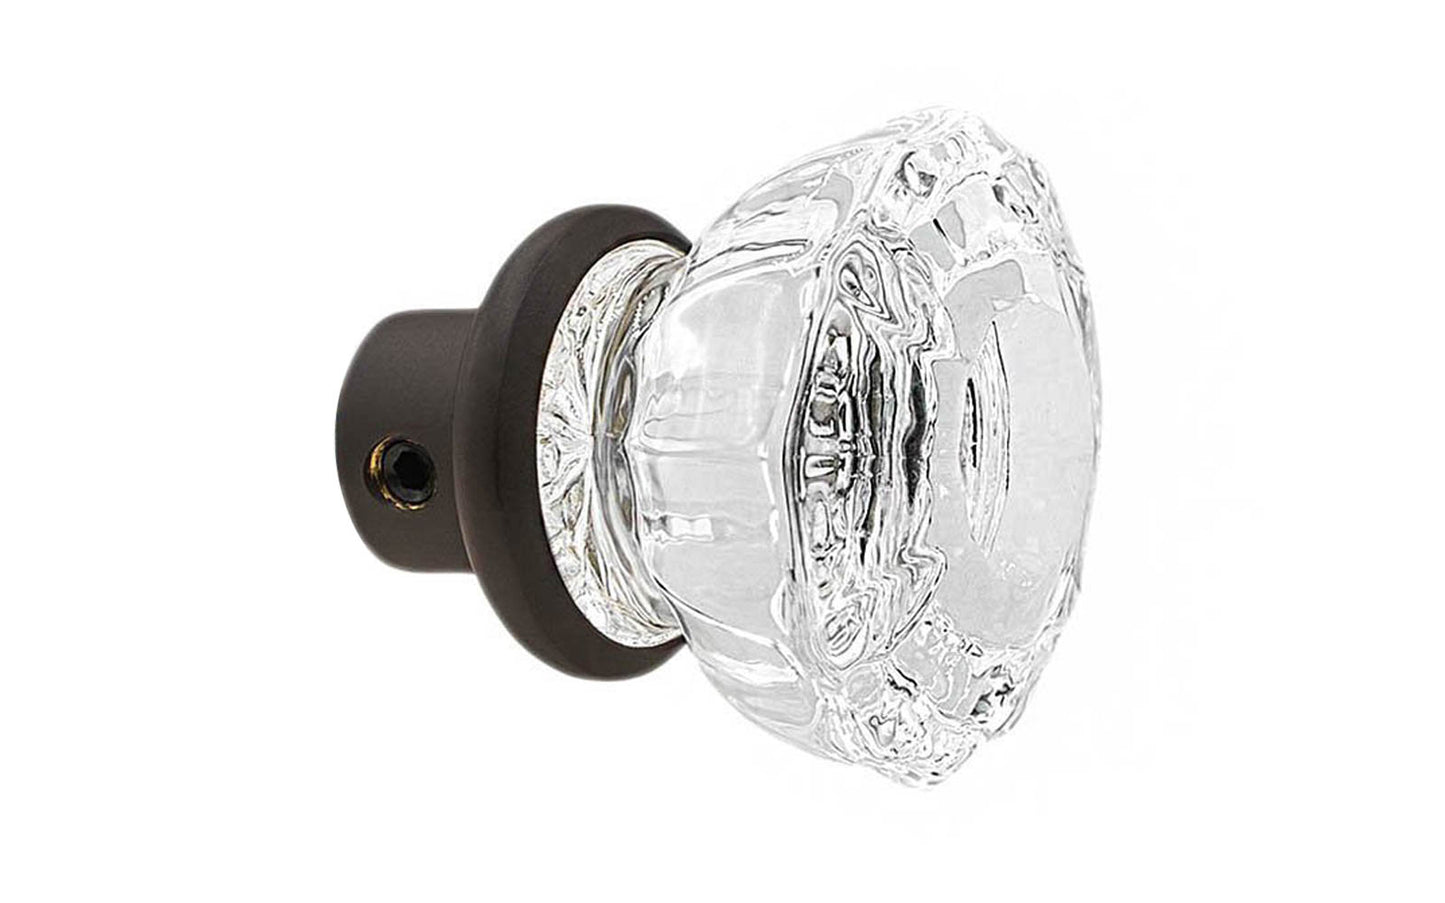 Single Classic Fluted Clear Glass Doorknob. A high quality & genuine glass doorknob with an attractive fluted design. The sparkling center point under glass amplifies reflected light to showcase beautiful facets. Solid brass base. Reproduction Glass Door Knobs. Traditional Fluted Glass Knobs. One knob. Oil Rubbed Bronze Finish.